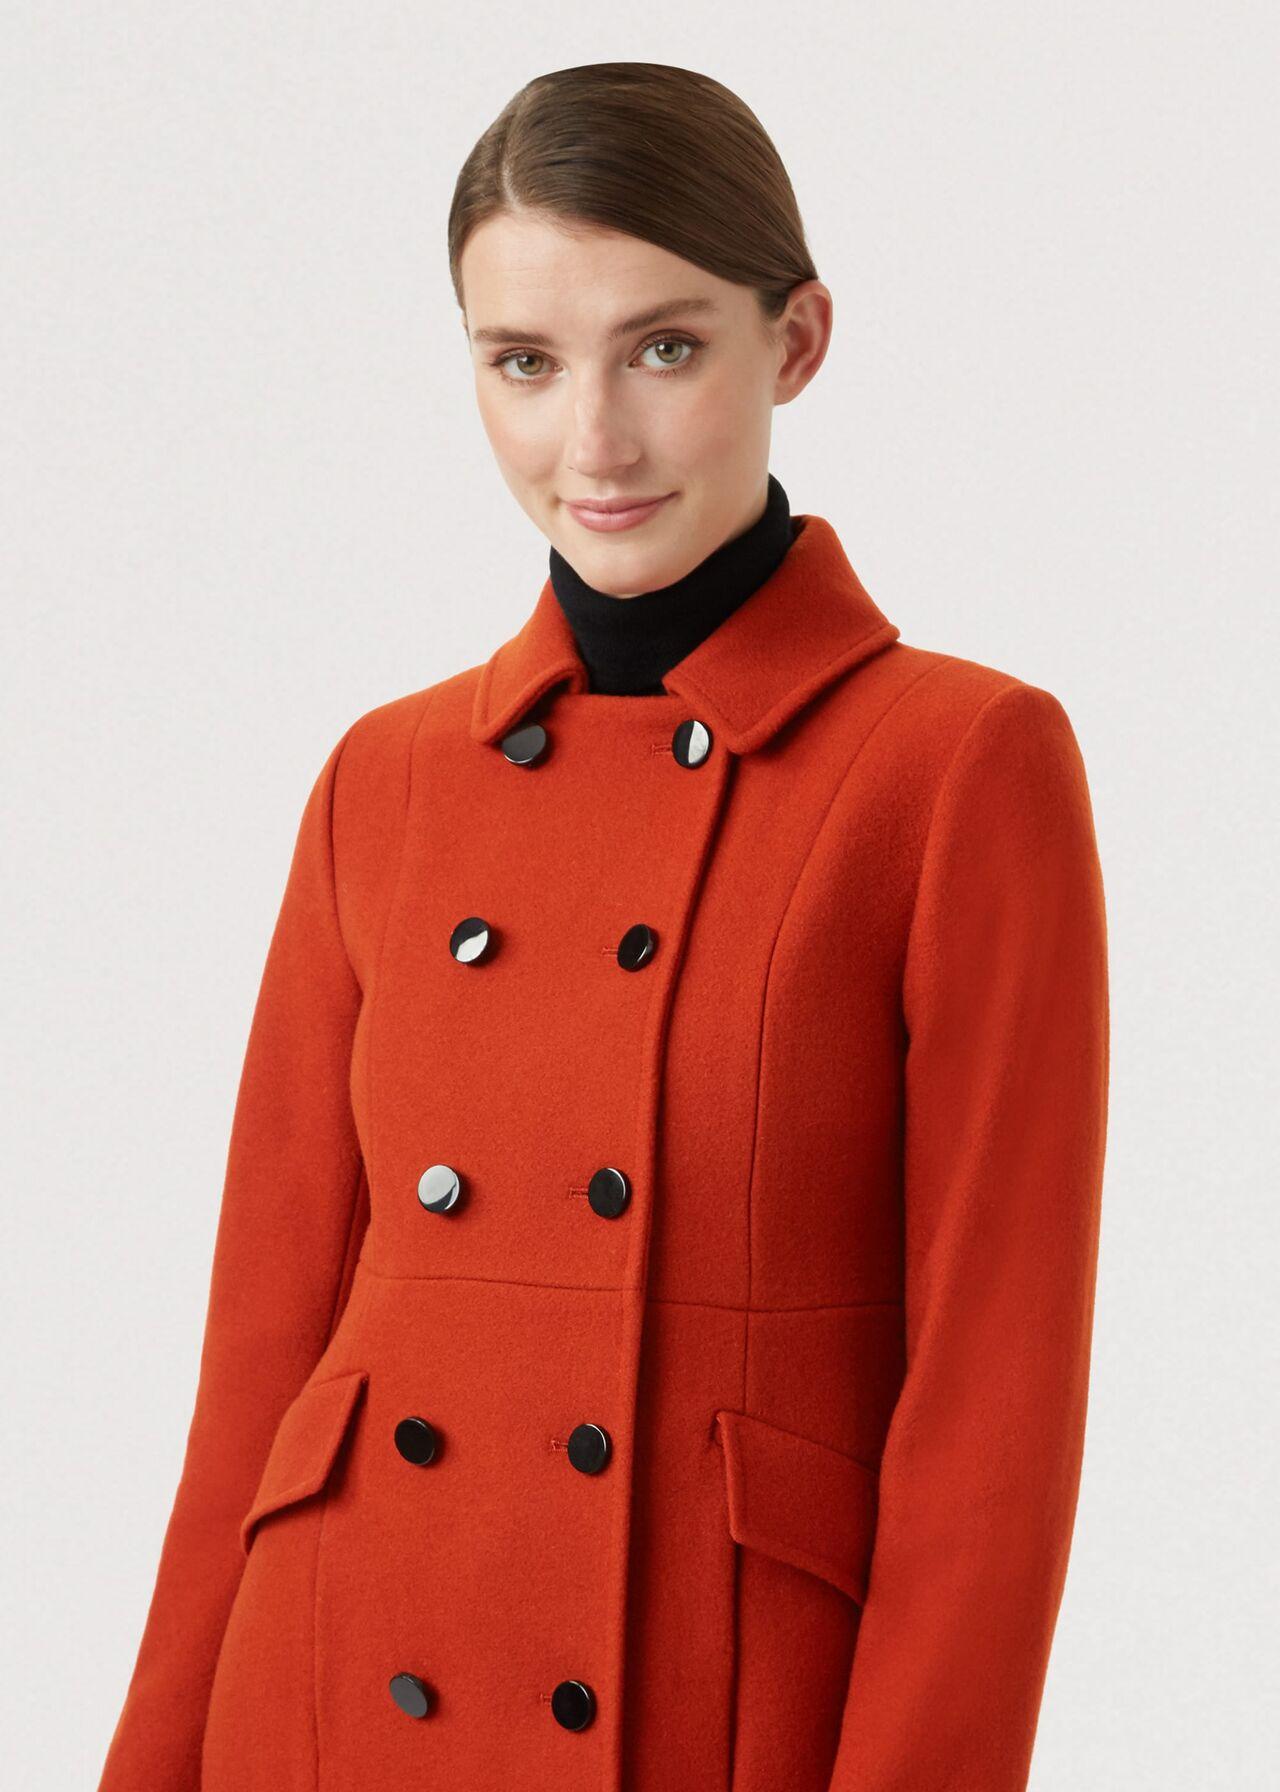 Hobbs Dorothea Wool Blend Coat In Red Save 60 Lyst | Free Hot Nude Porn ...